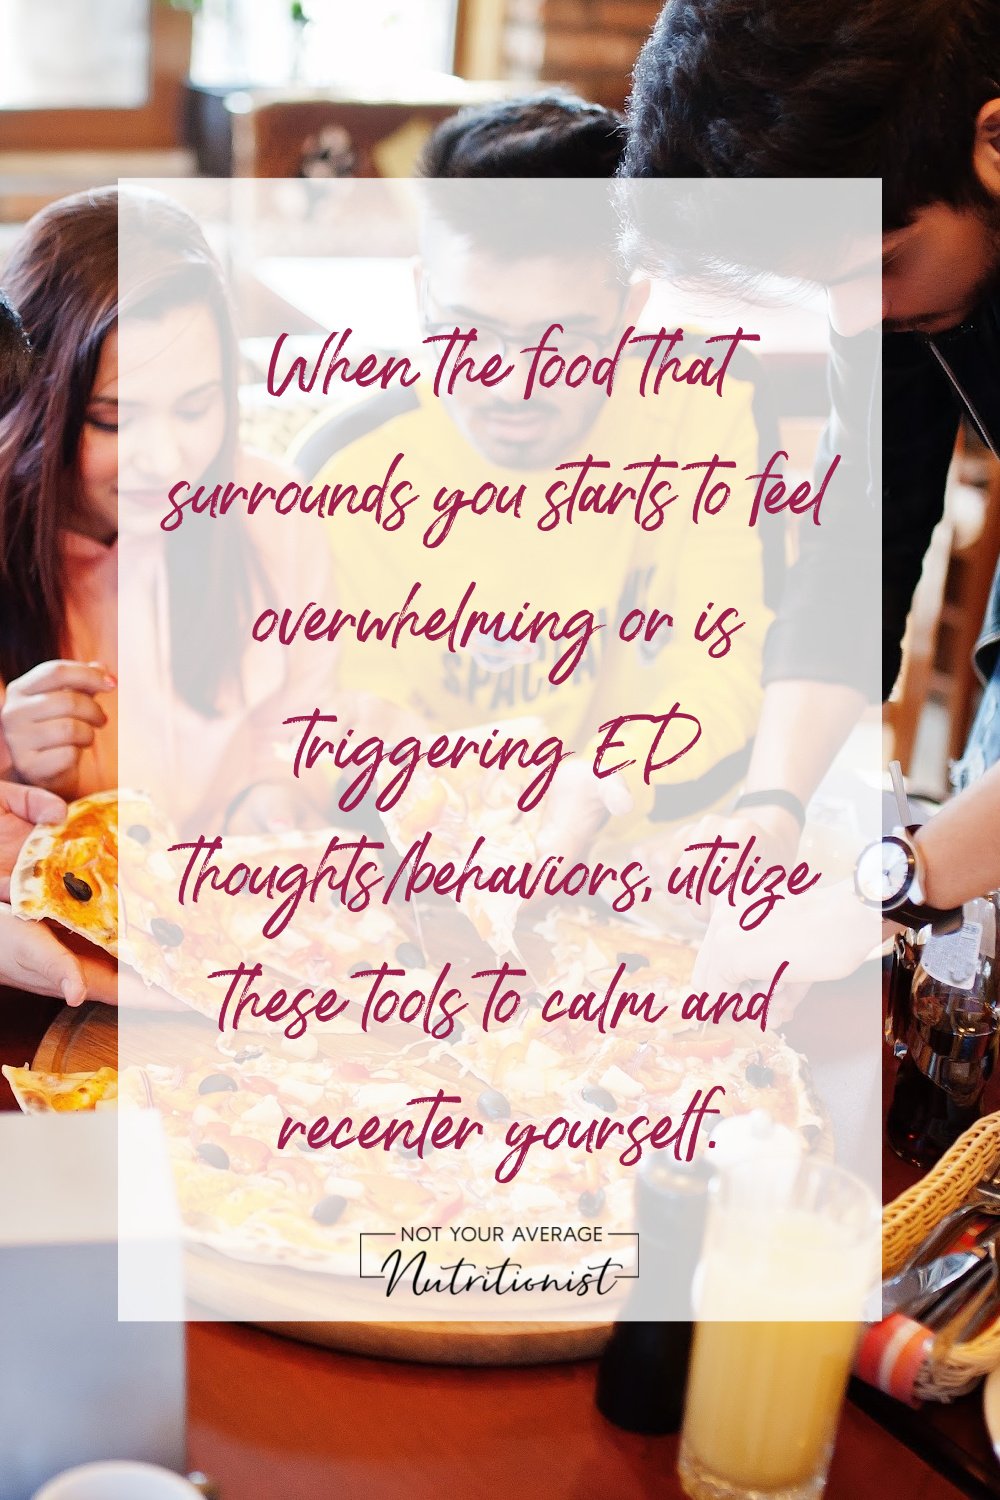 When the food that surrounds you starts to feel overwhelming or is triggering ED thoughts/behaviors, utilize these tools to calm and recenter yourself.